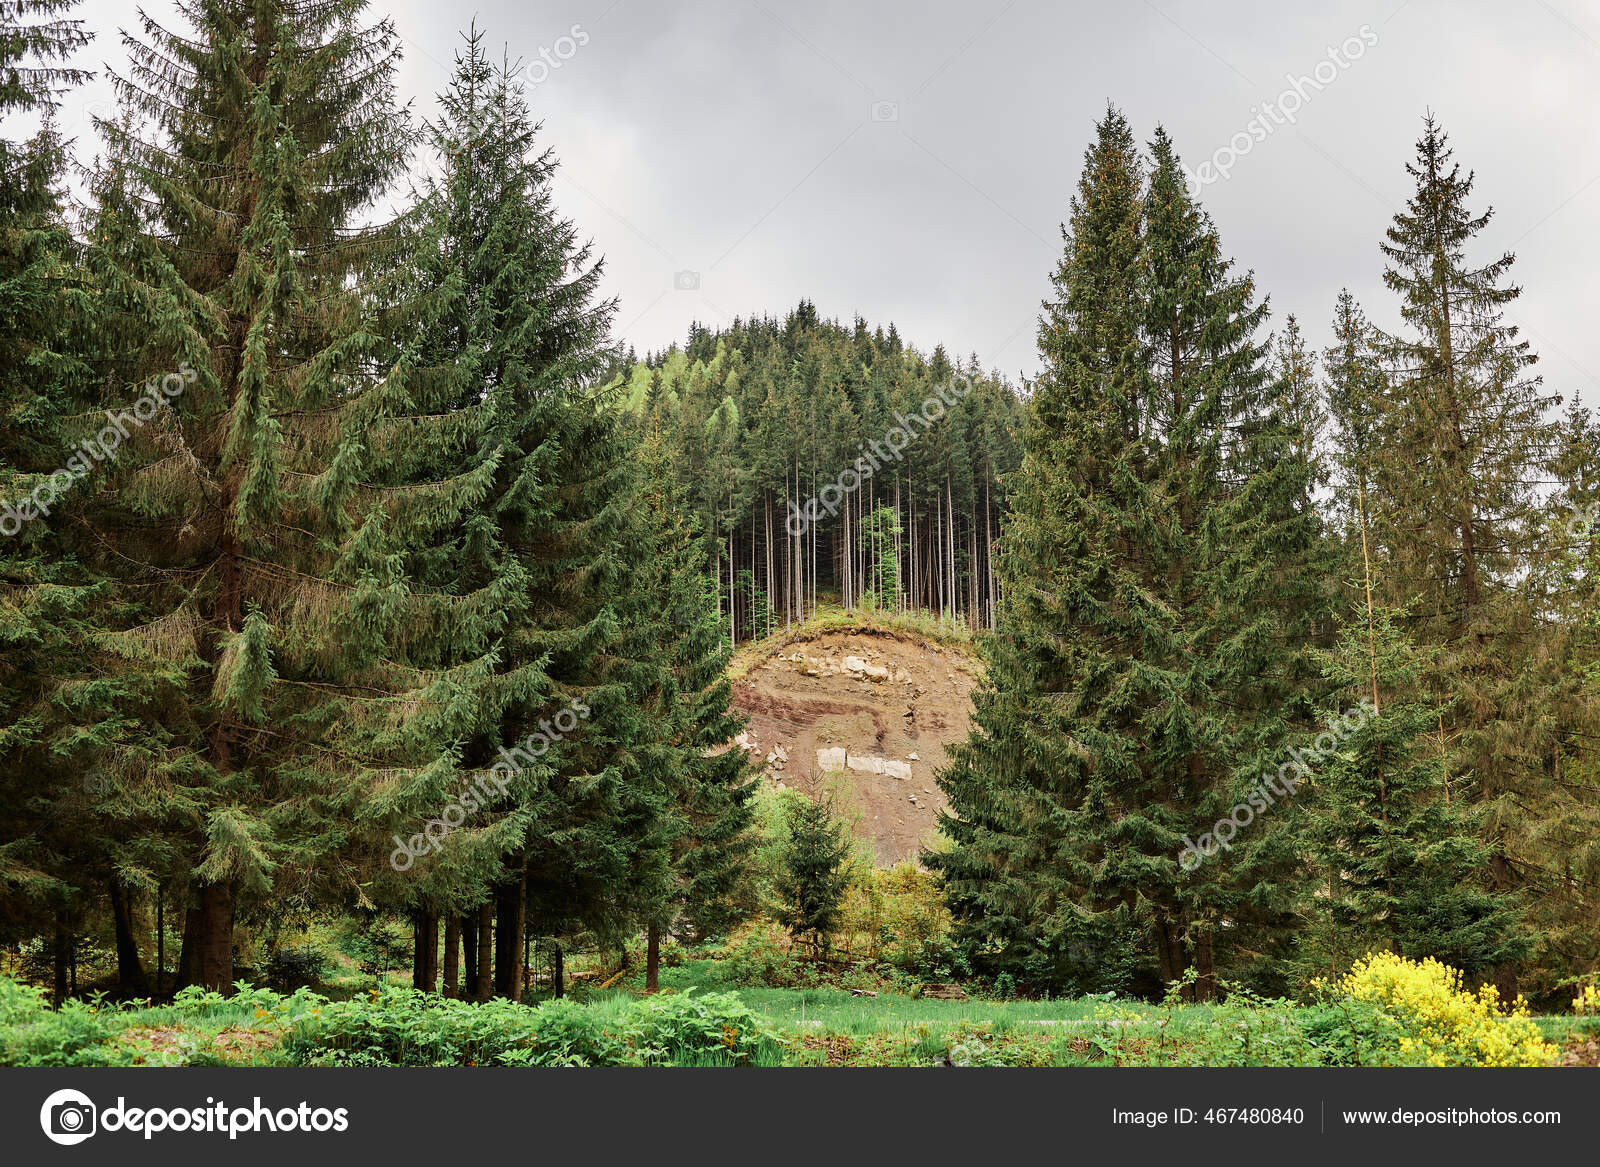 Green Forest Hill Landscape As a High Definition Panorama Stock Photo -  Image of nature, landscape: 199618368